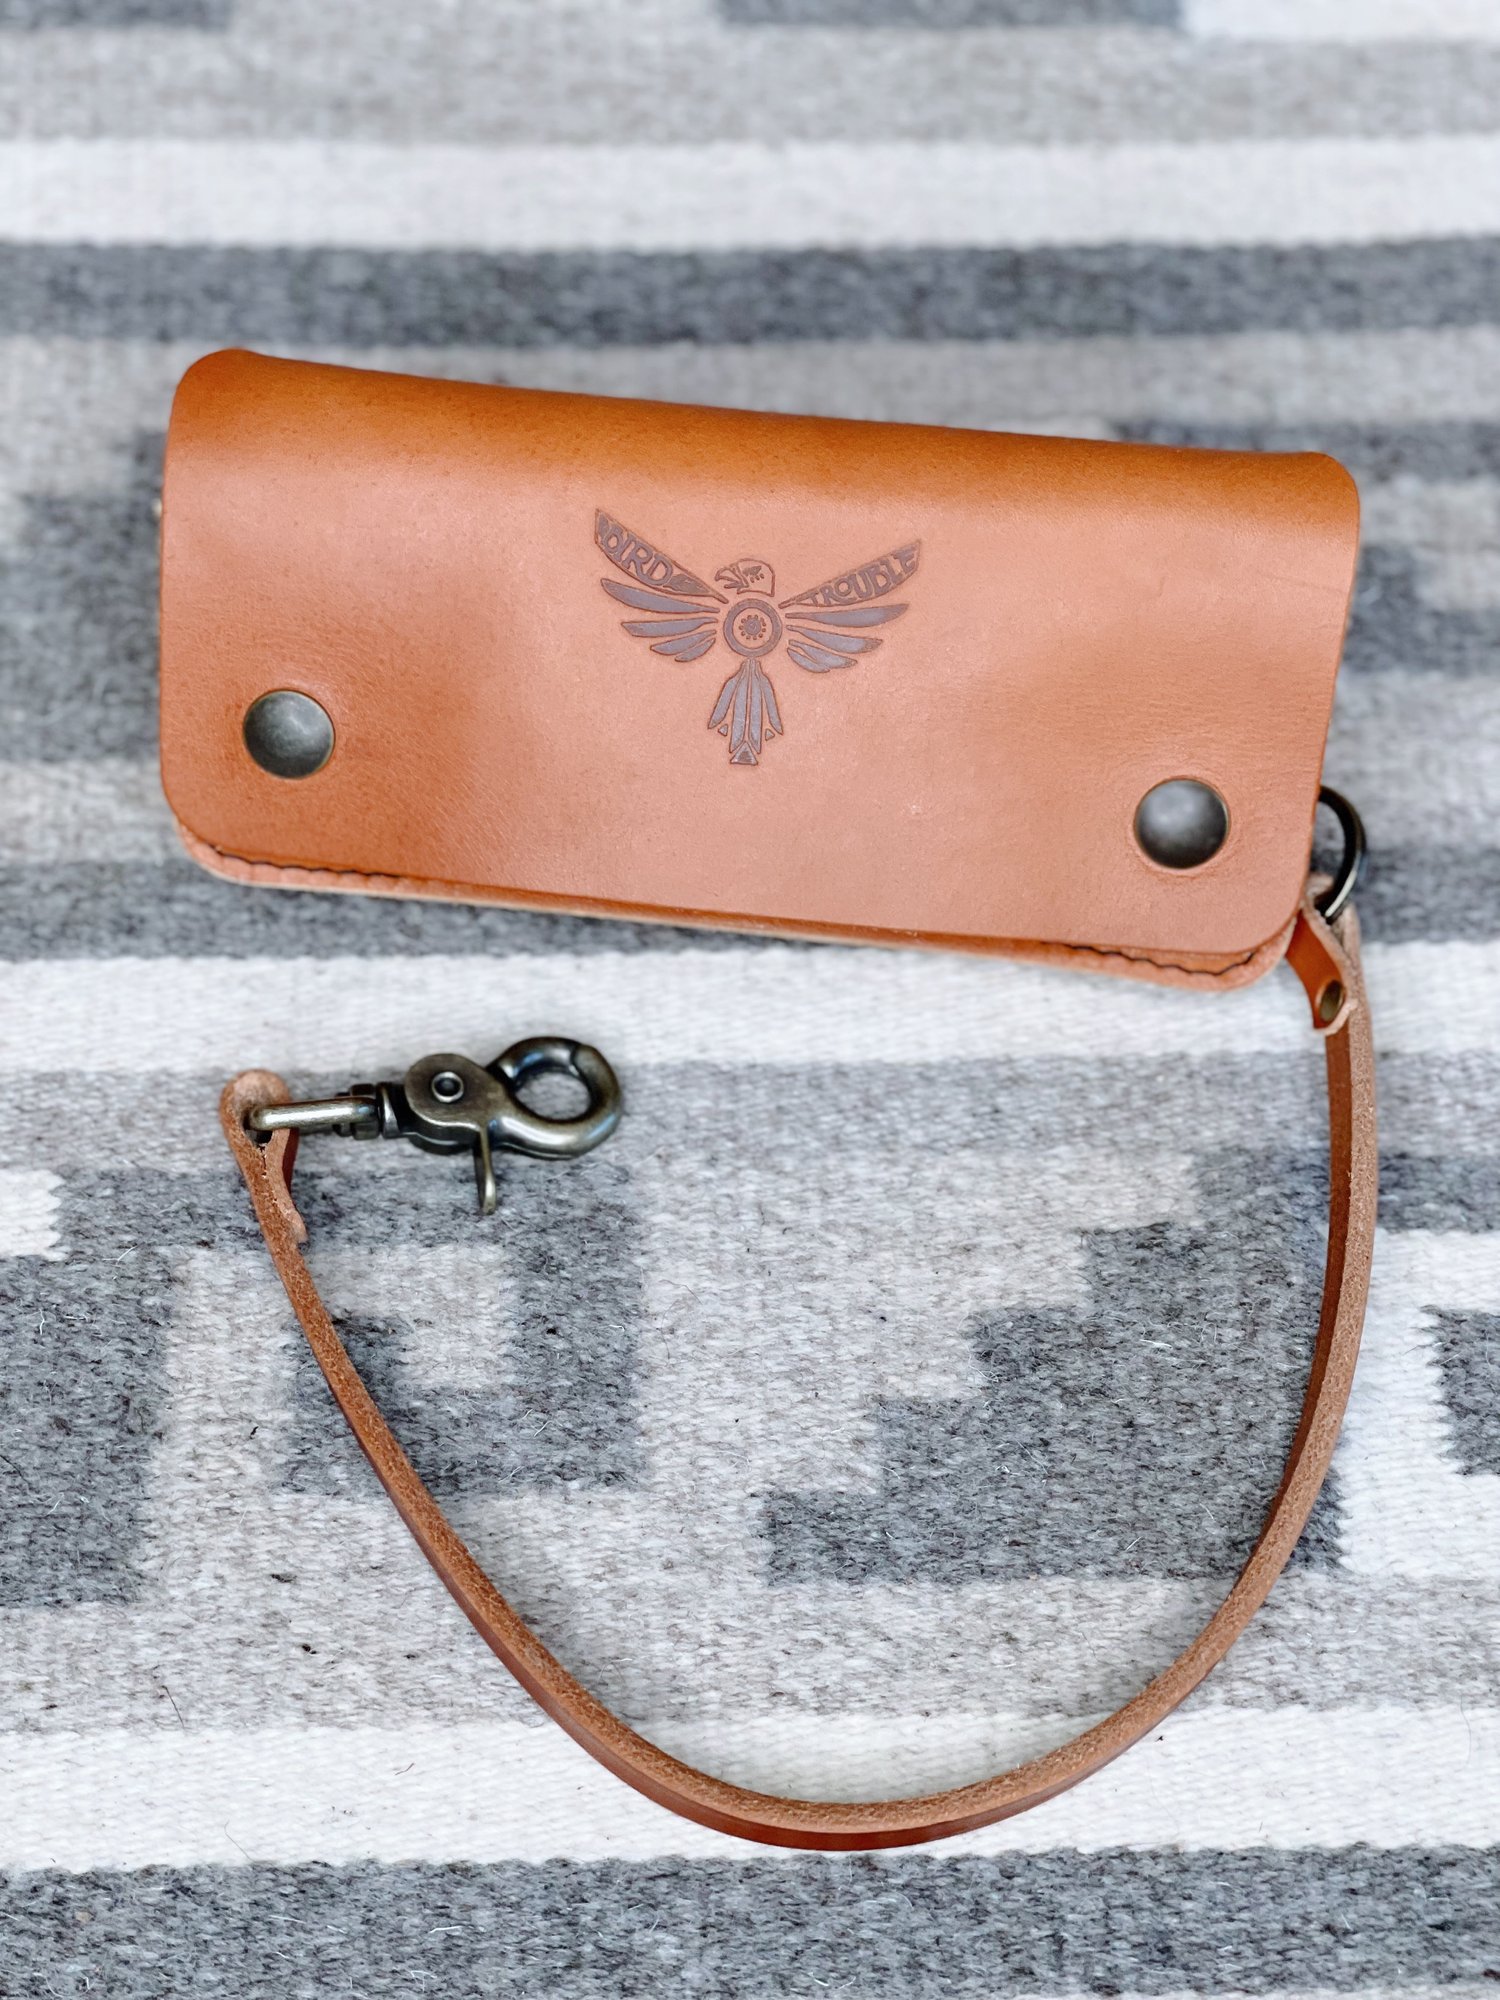 Leather Pouch Wallet 